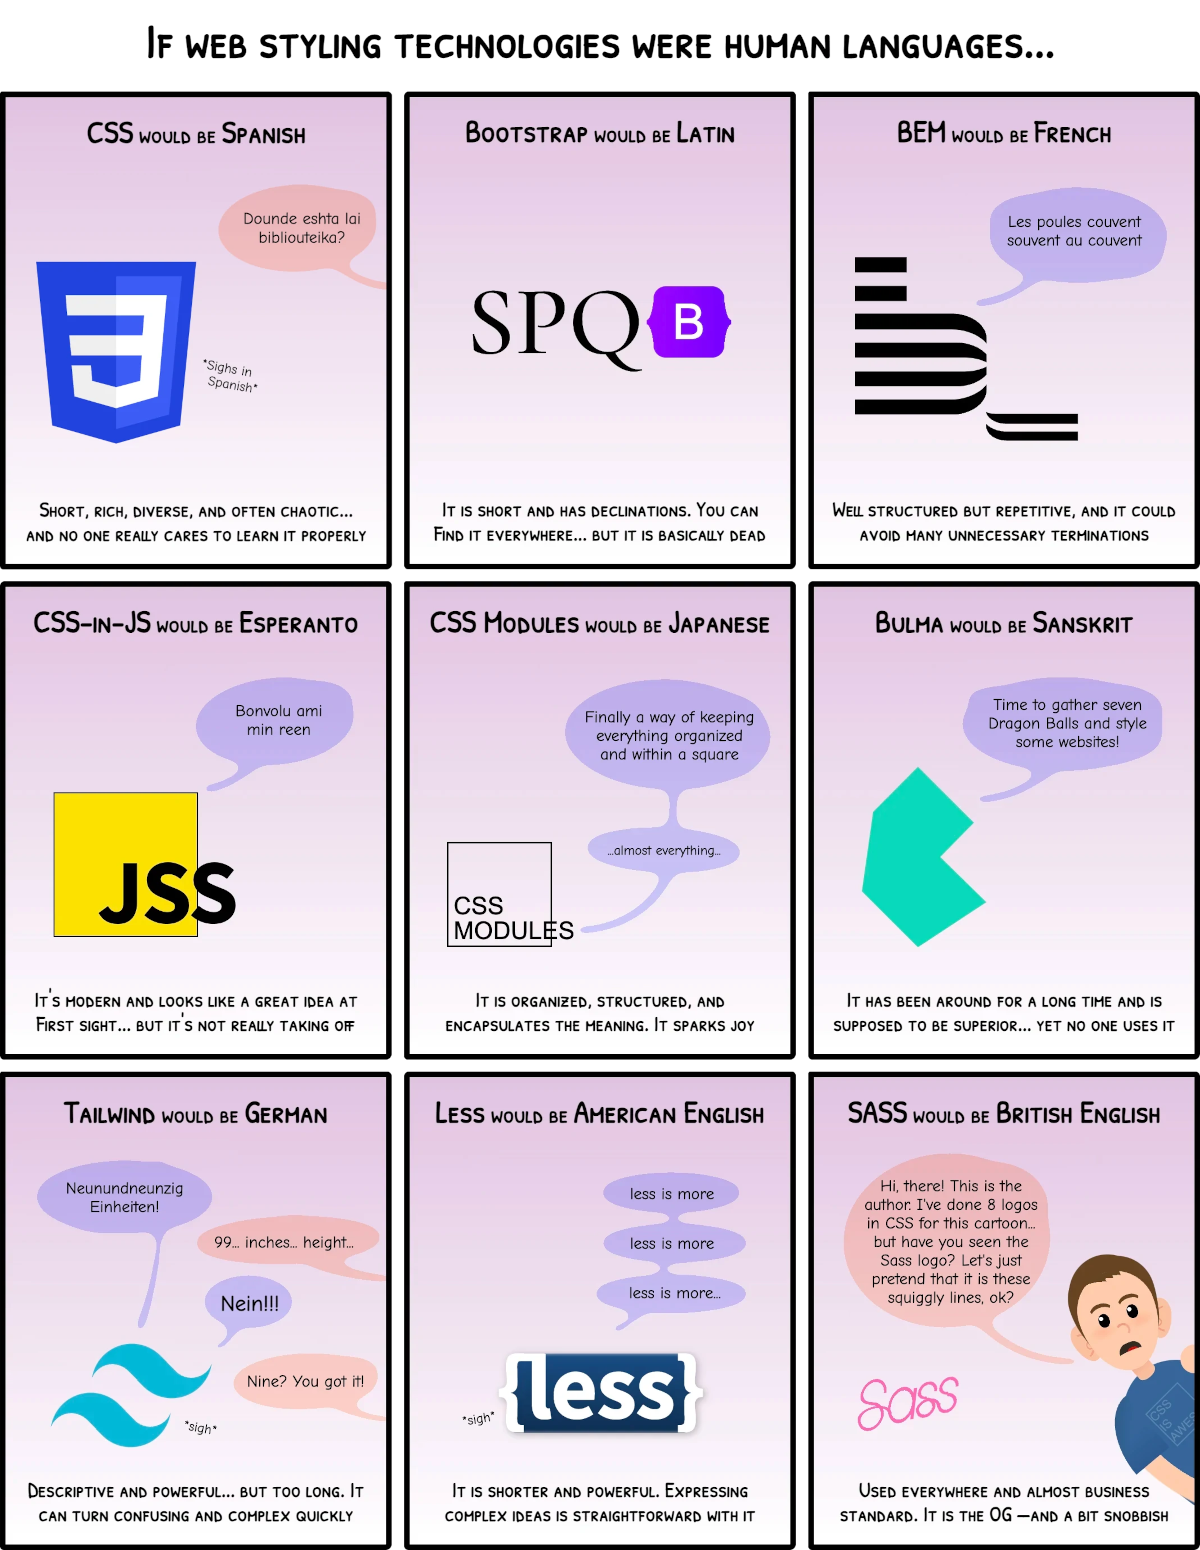 Comic titled 'If web styling technologies were human languages...' with 9 panels. CSS would be Spanish, Bootstrap would be Latin, BEM would be French, CSS-in-JS would be Esperanto, CSS Modules would be Japanese, Bulma would be Sanskrit, Tailwind would be German, Less would be American English, and Sass would be British English. For a more detailed description check the linked source code.